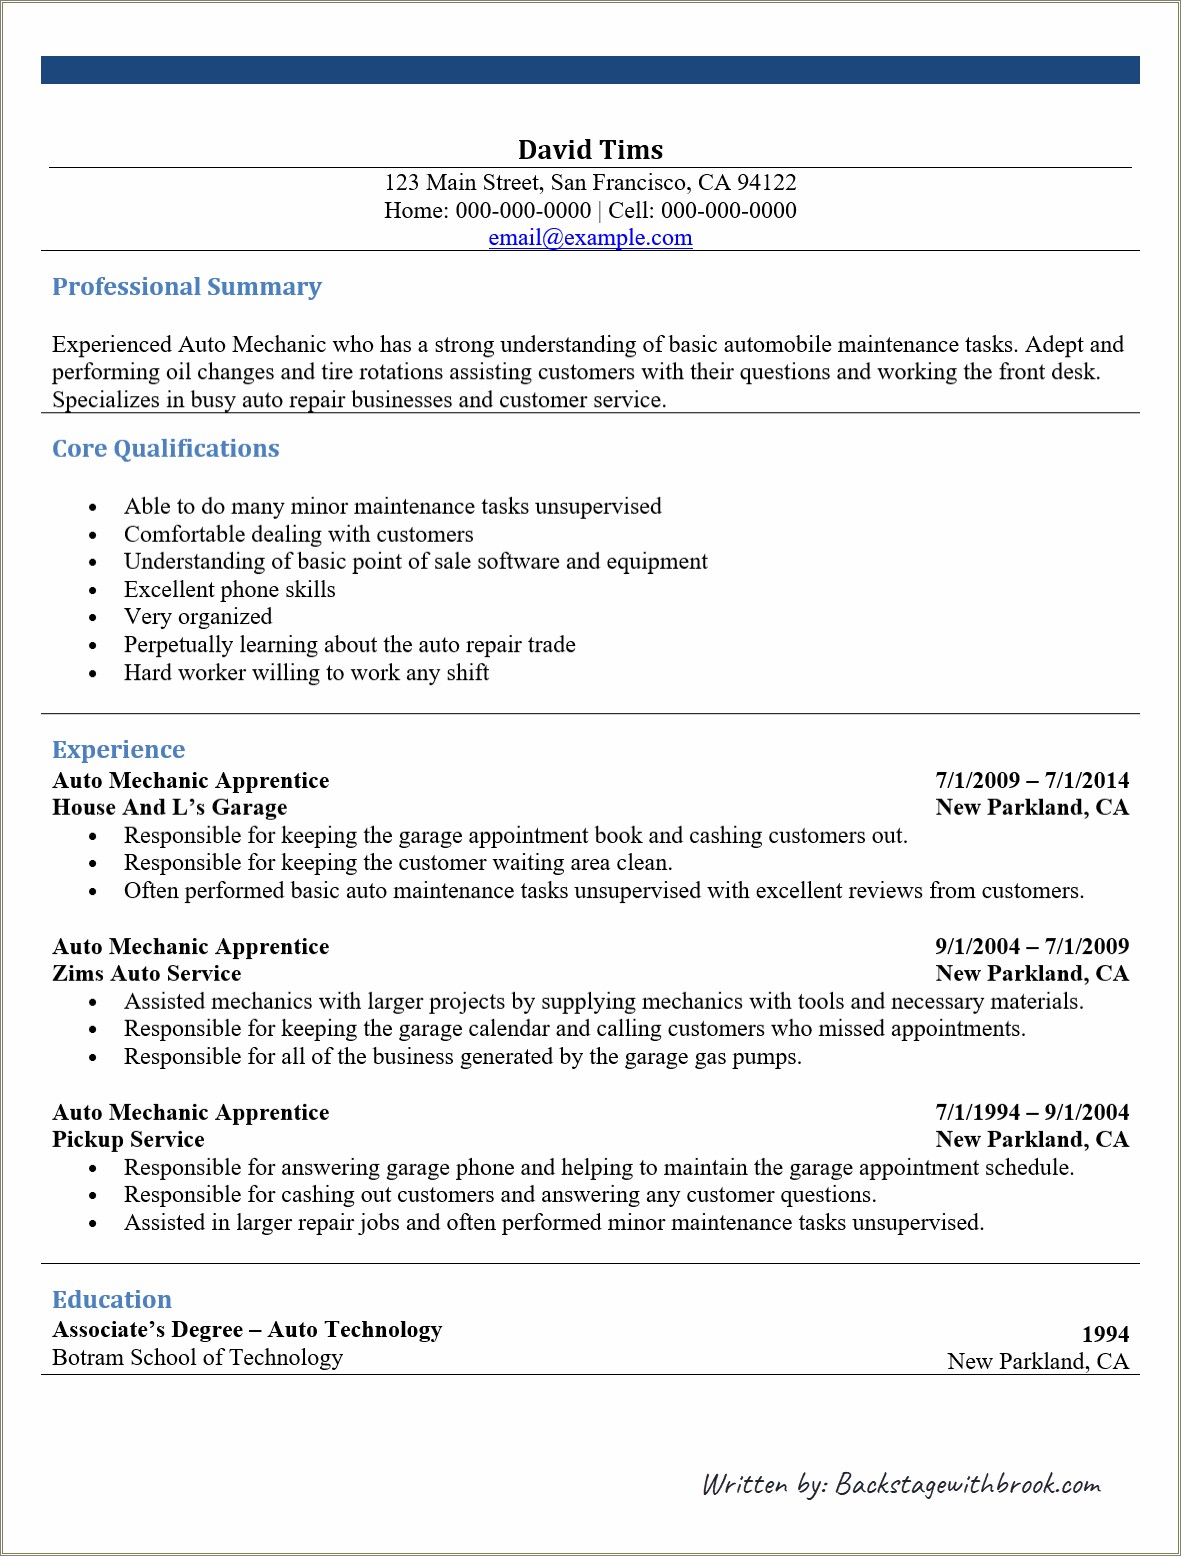 Resume Wording For Answering Busy Phones